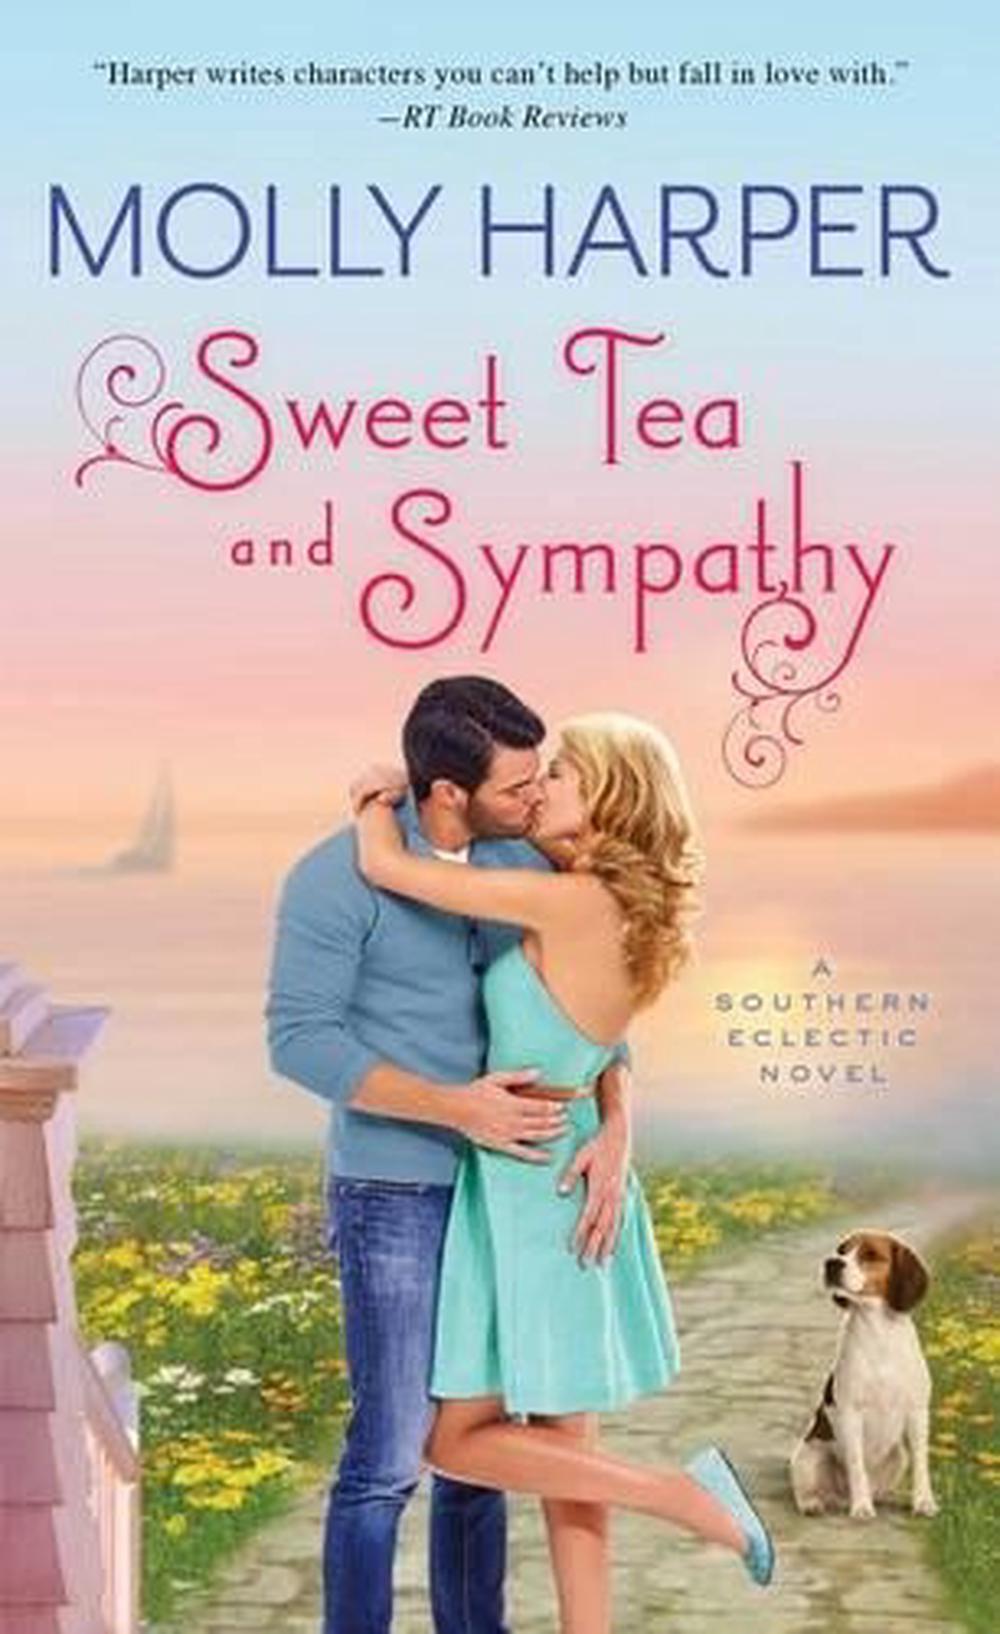 Sweet Tea and Sympathy by Molly Harper